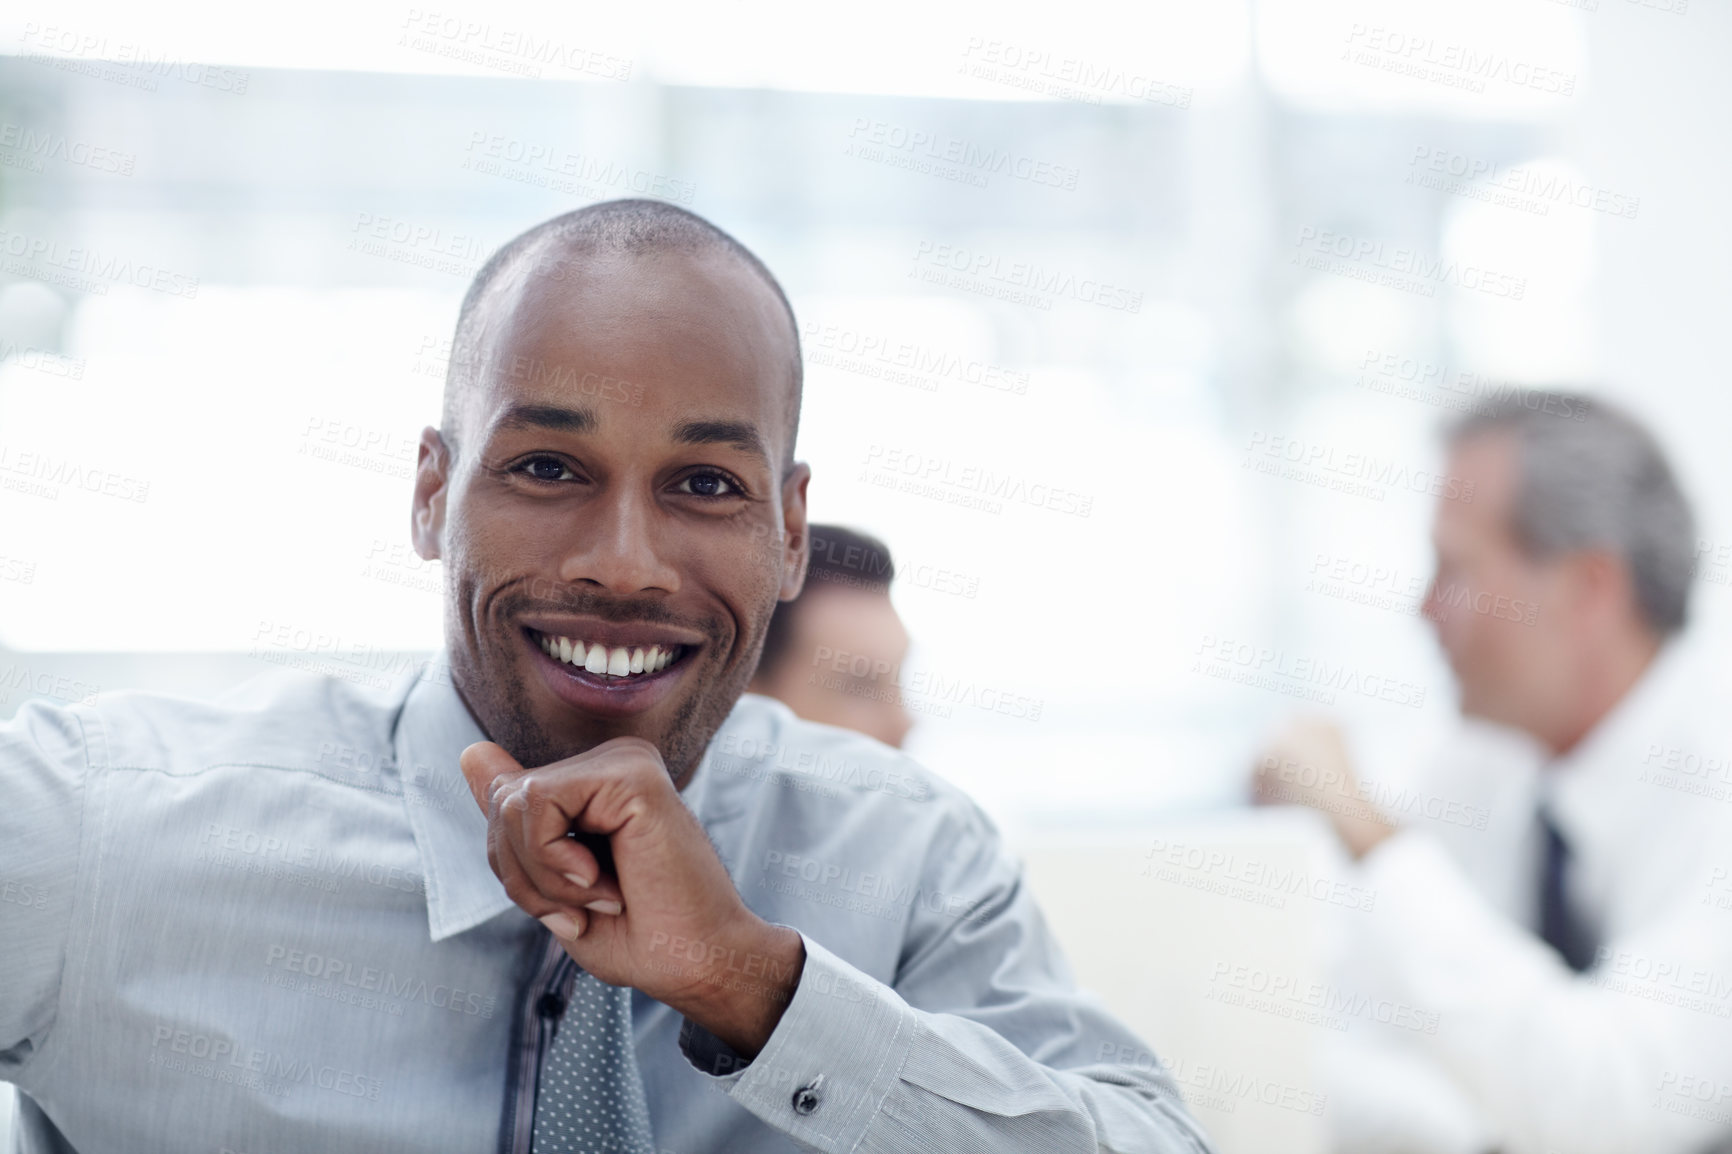 Buy stock photo A handsome African businessman resting his chin on his hand and smiling with colleagues in the background